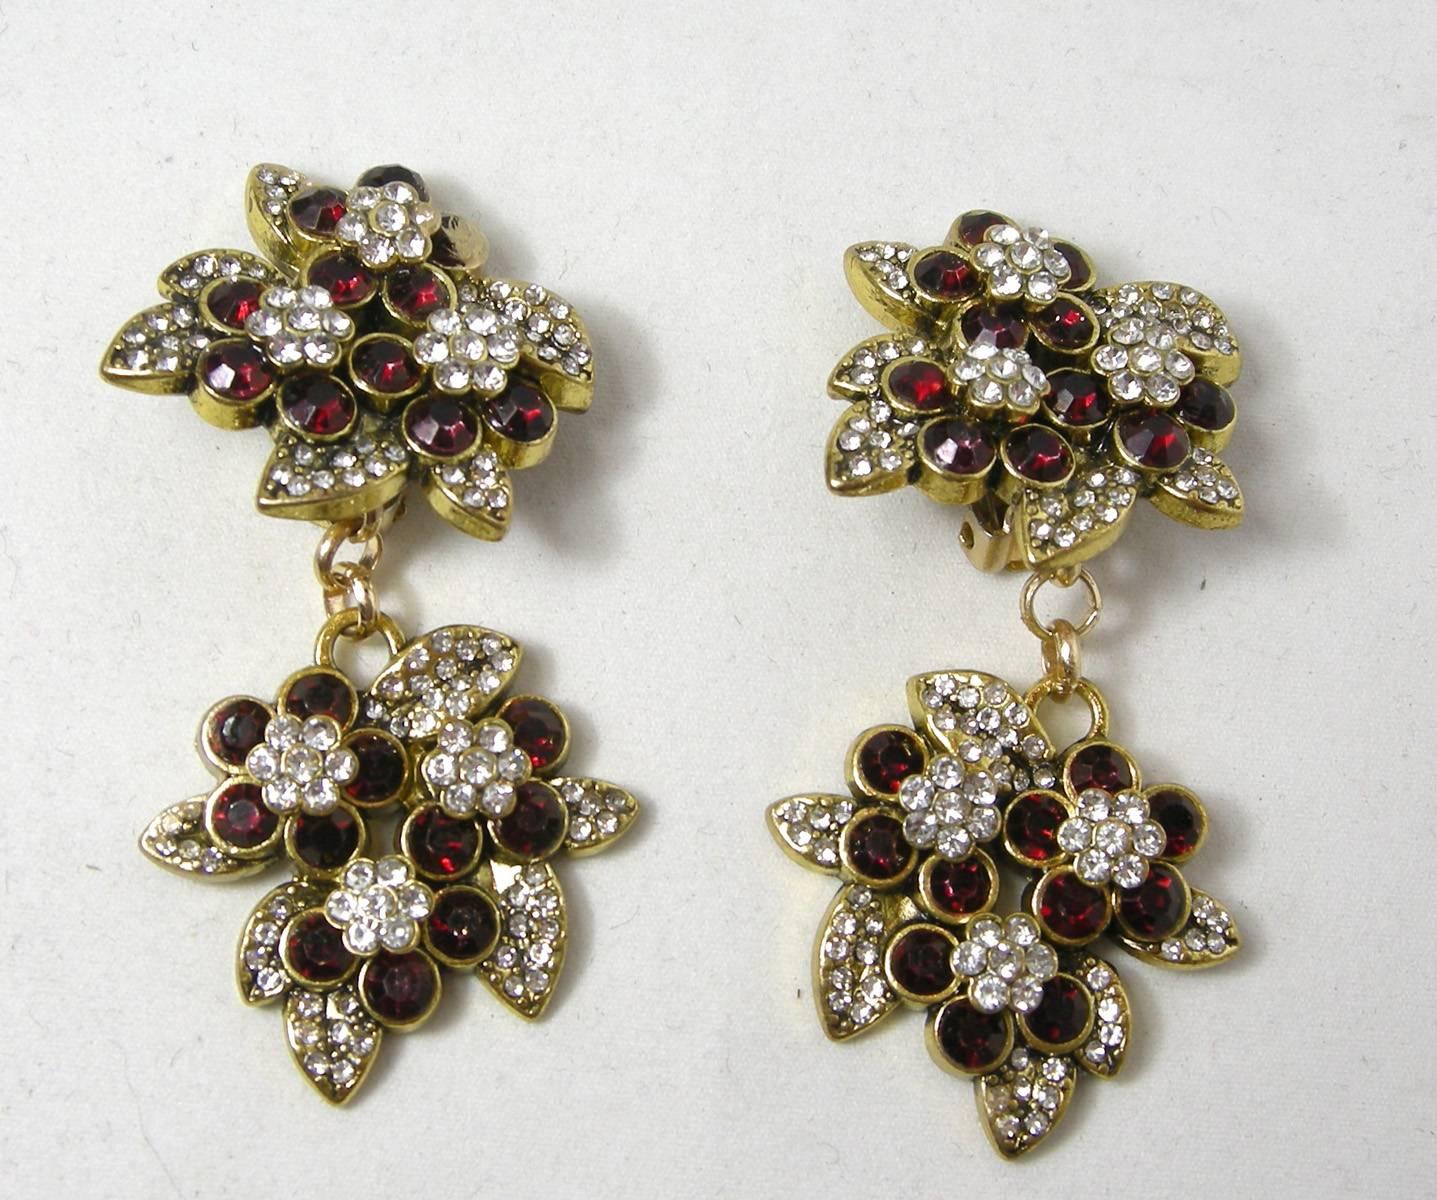 These DeMario clip earrings have a floral design on the top and bottom combining faux ruby stones on the outside of each flower and a cluster of clear rhinestones in the center.  They are made in a gold tone metal finish and signed “DeMario” on each